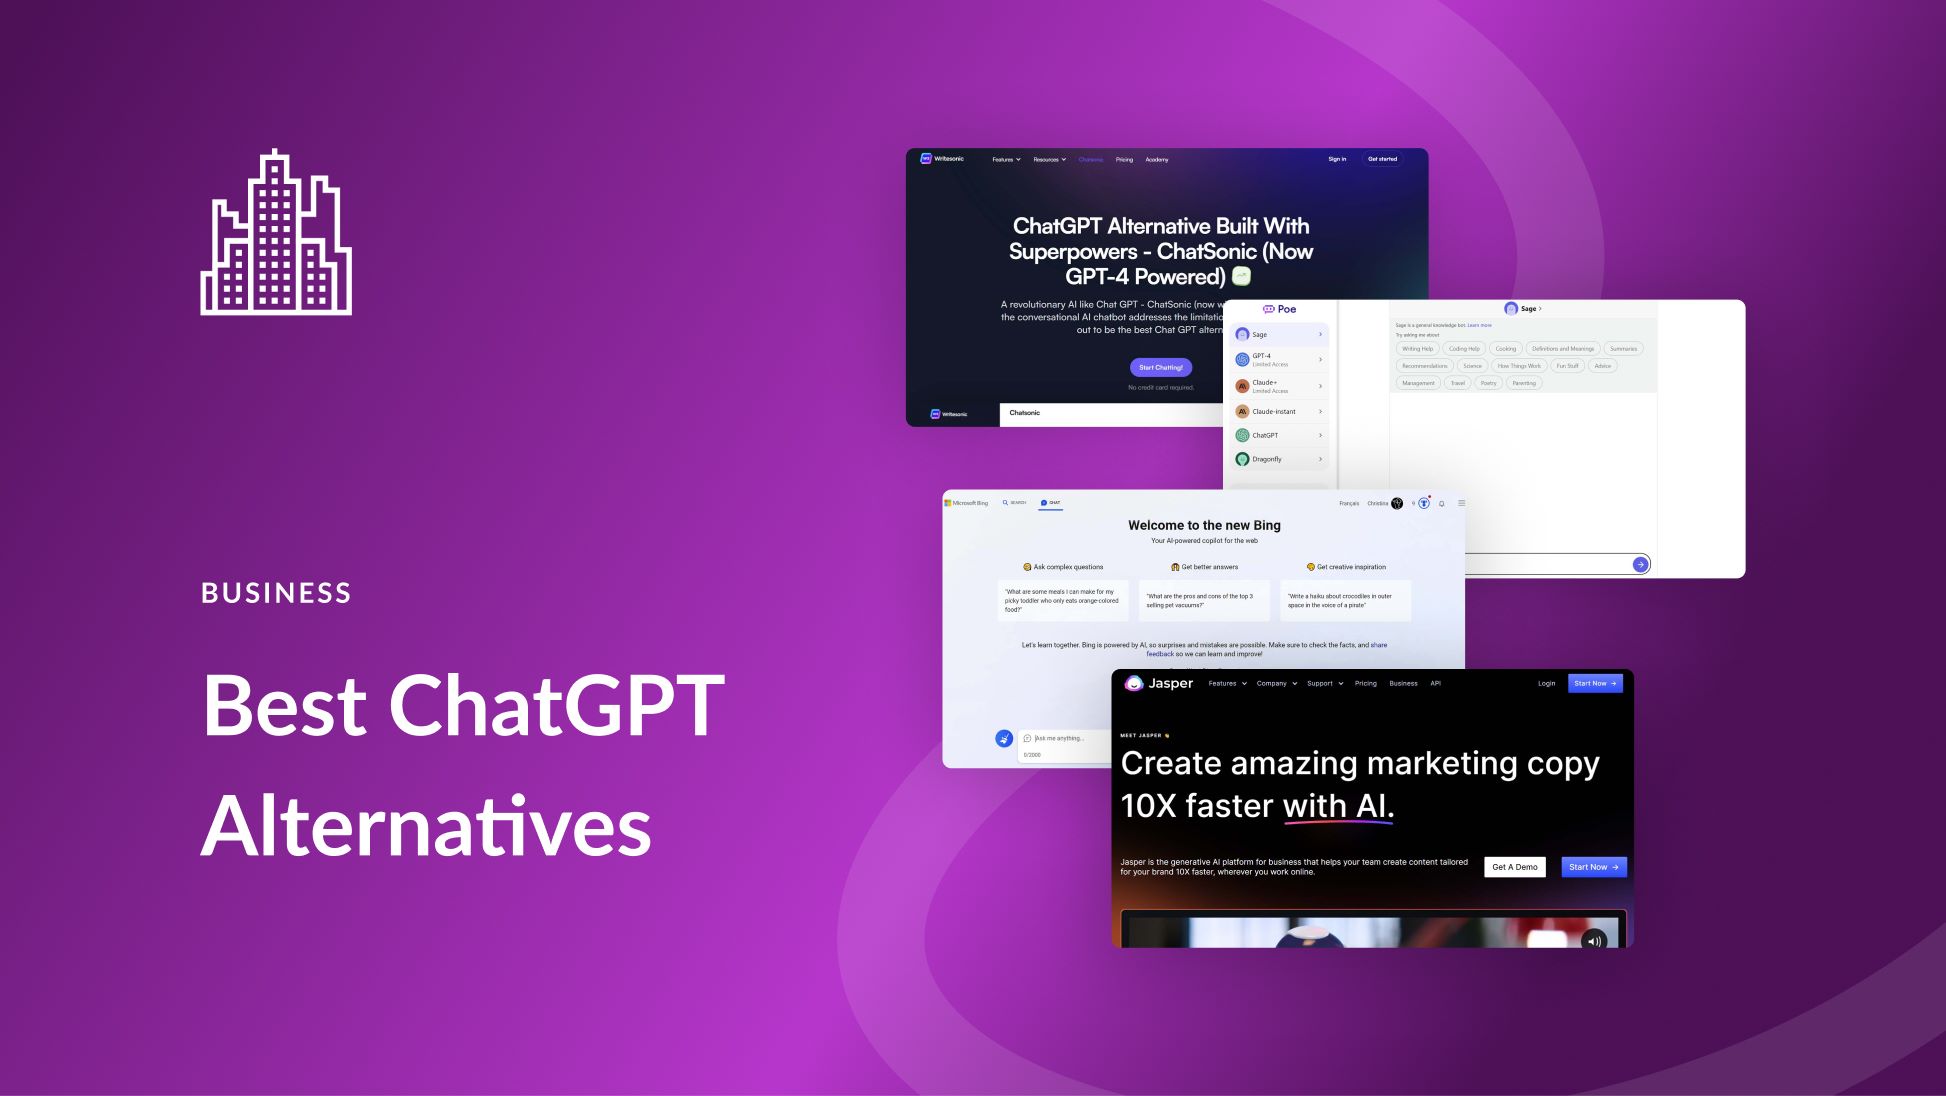 8 Best ChatGPT Alternatives in 2023 (Free and Paid)